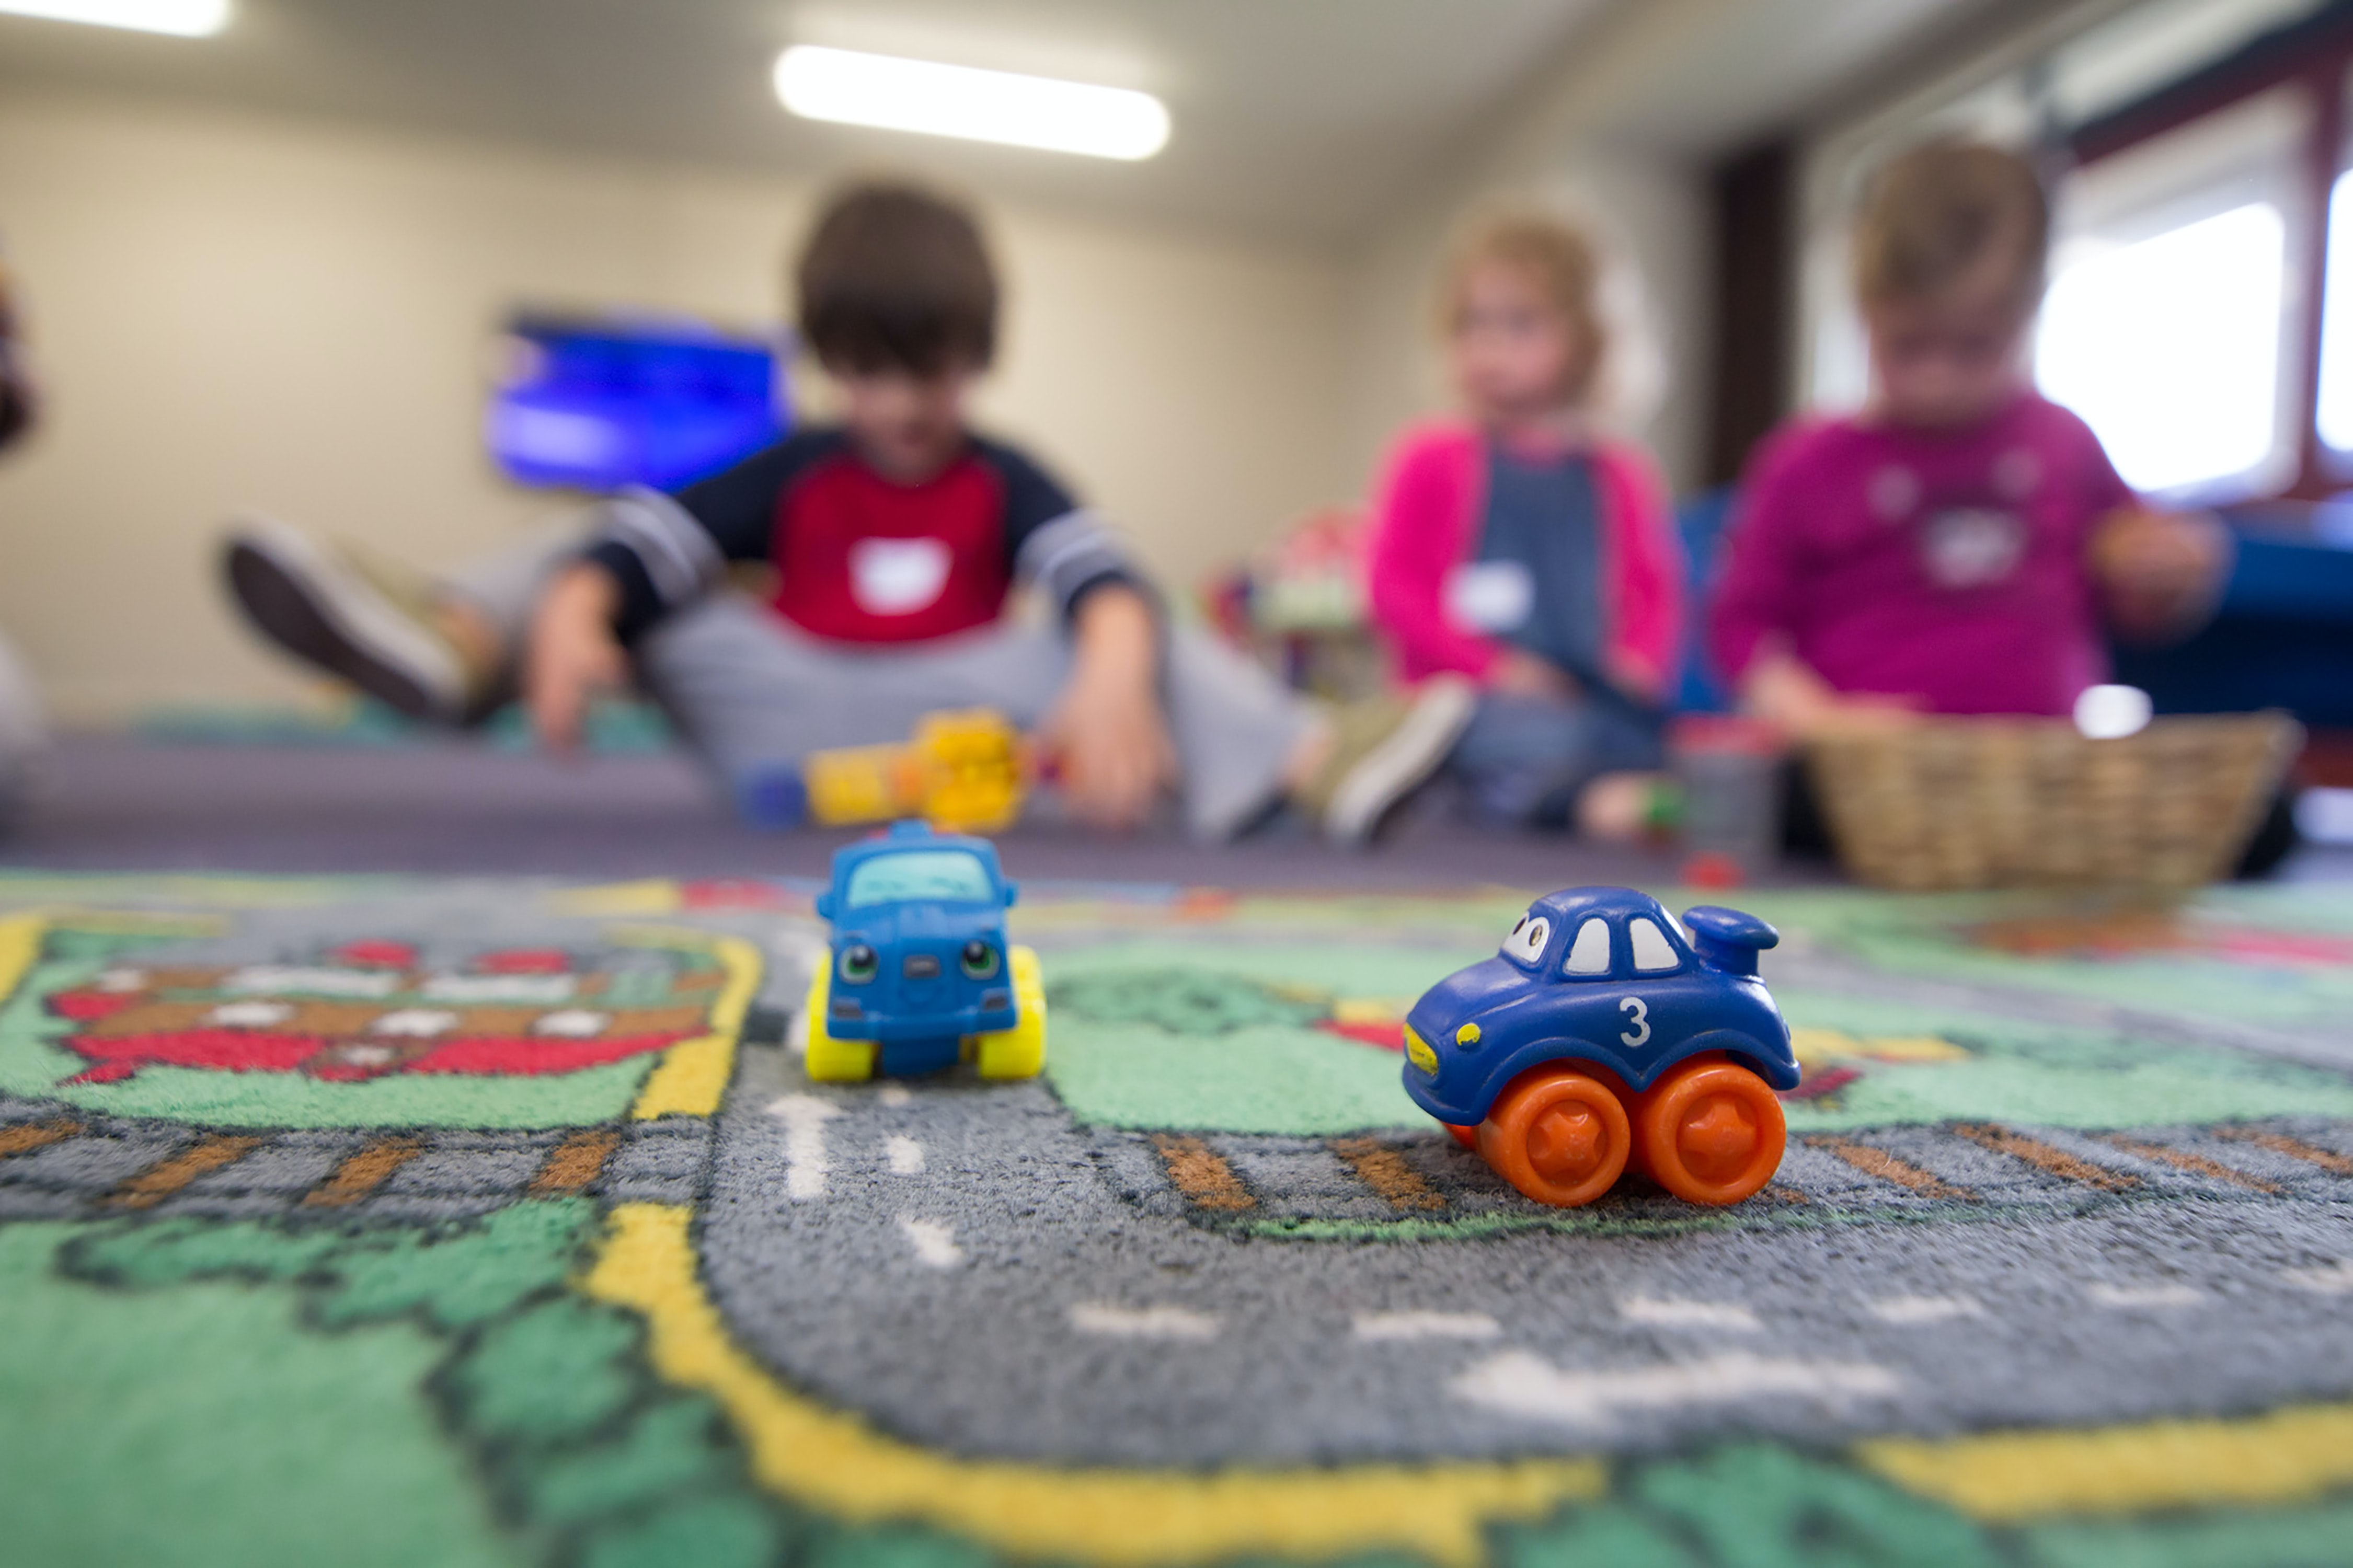 Three kids playing on a rug with trucks